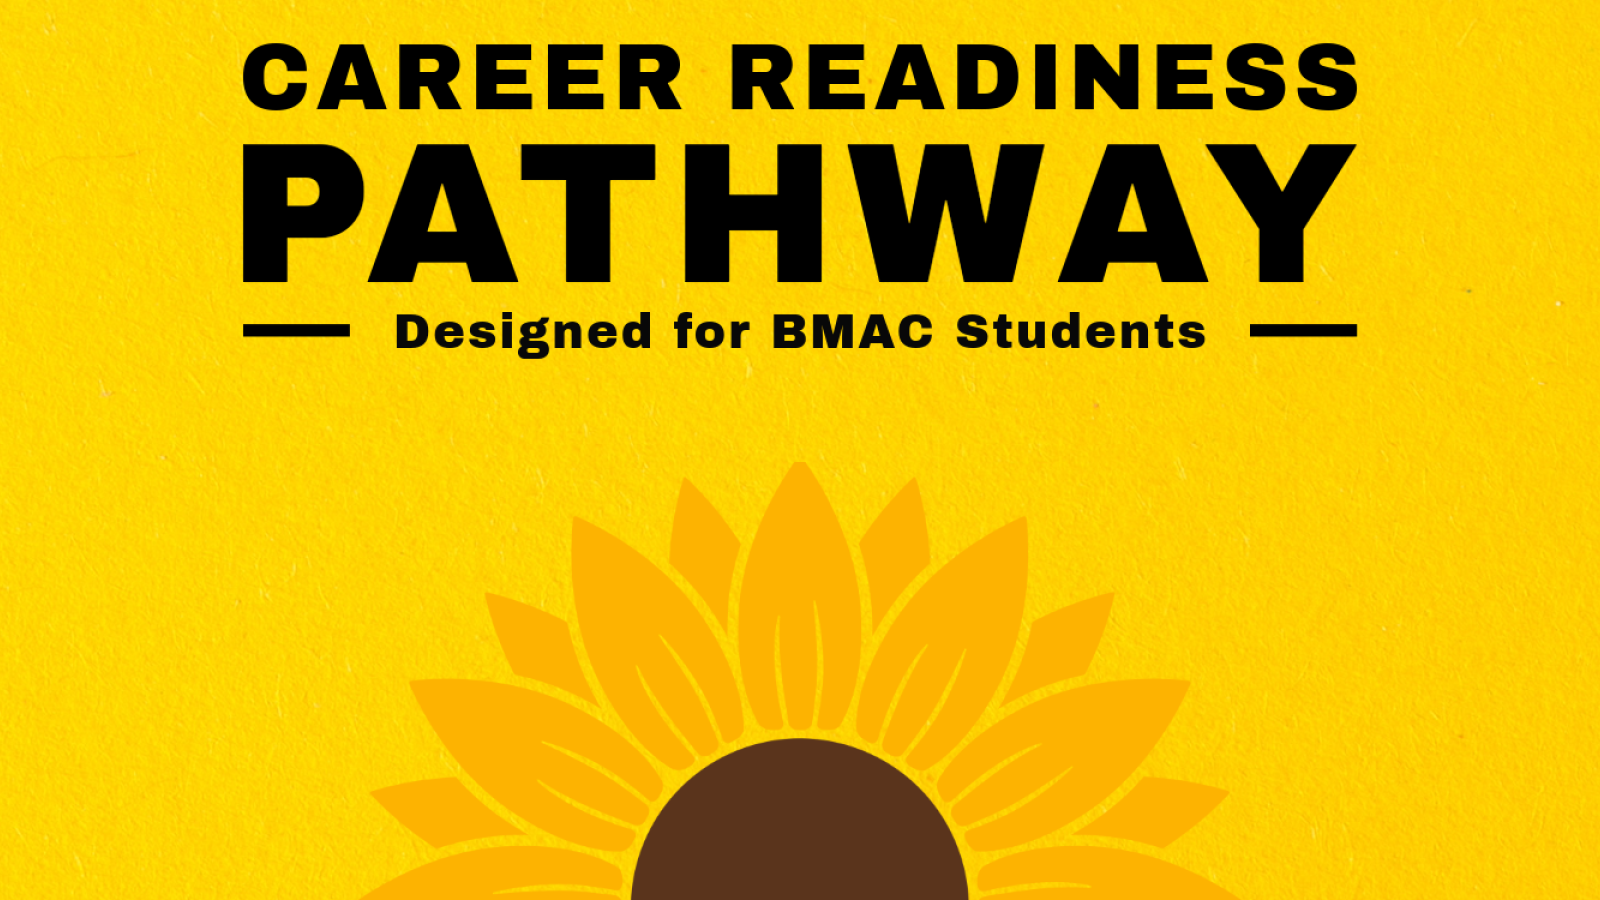 Career Readiness Pathways Designed for BMAC students